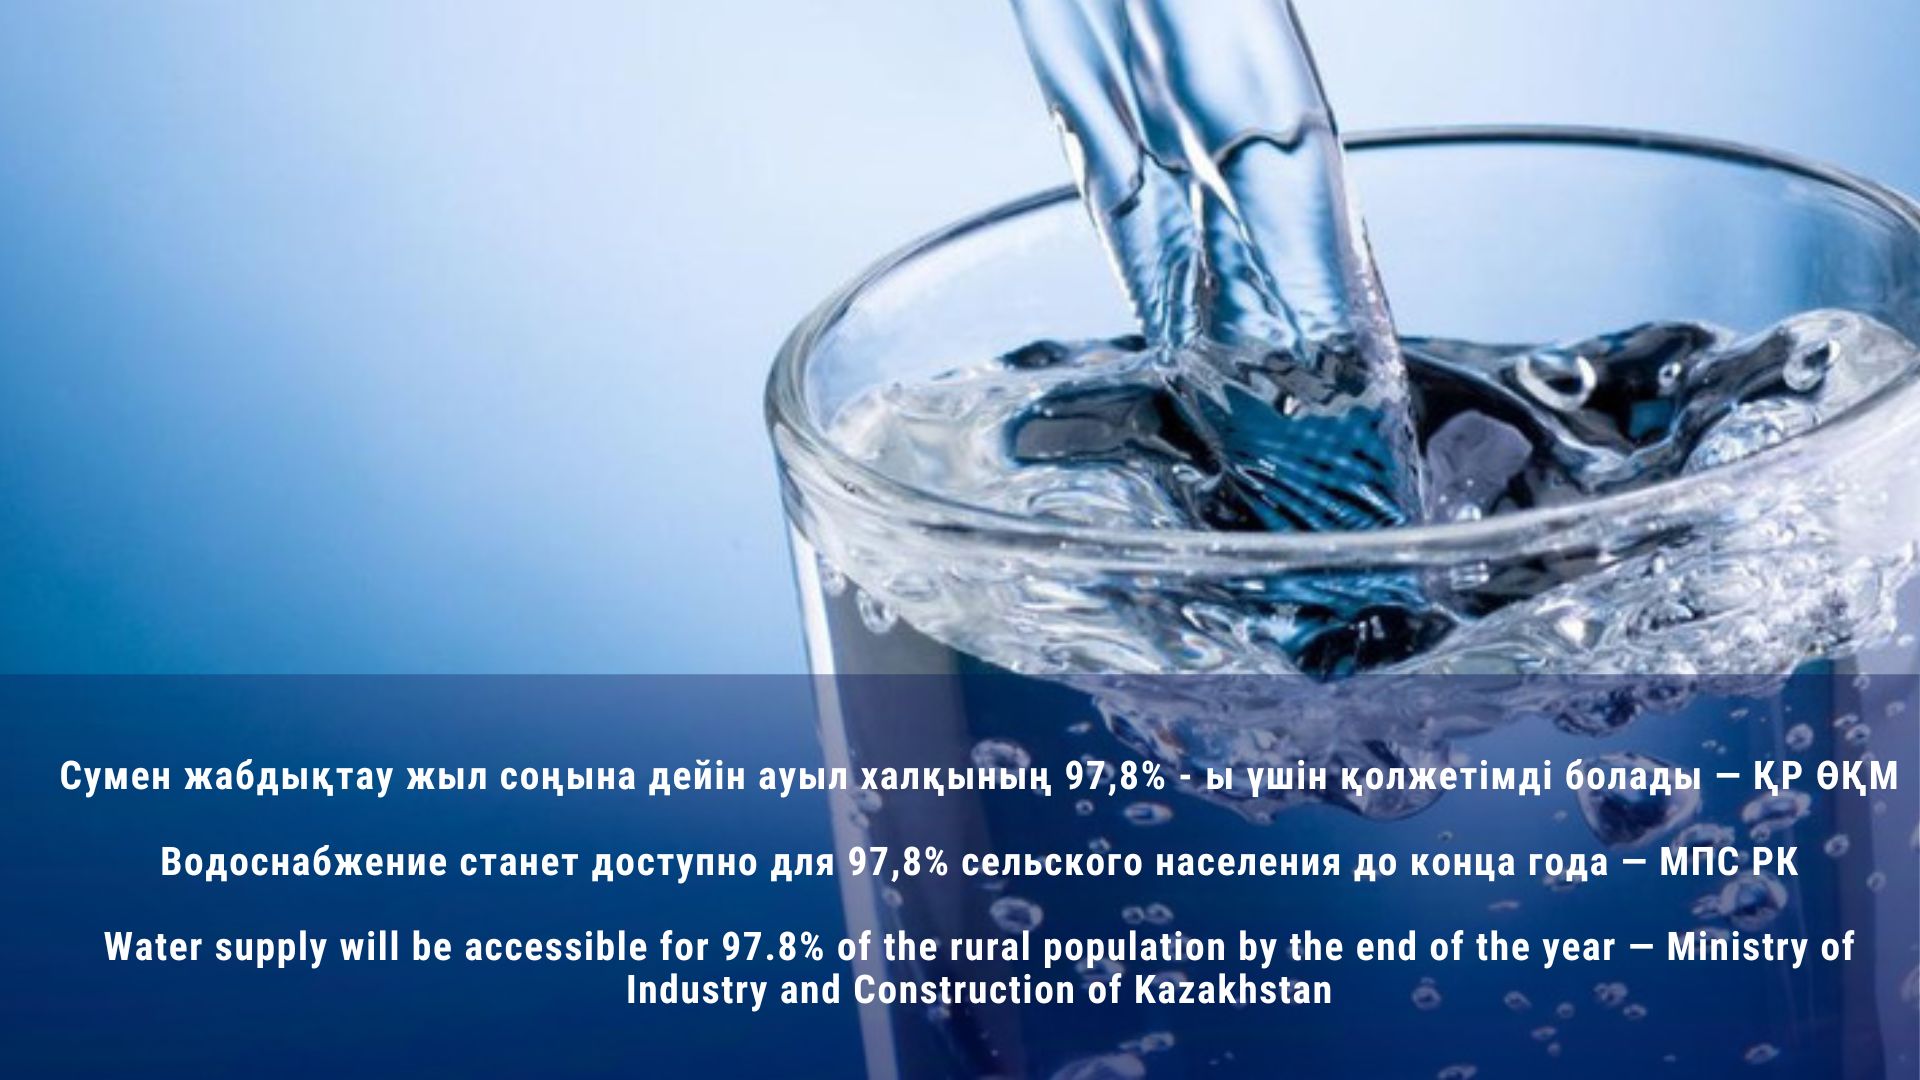 Water supply will be accessible for 97.8% of the rural population by the end of the year — Ministry of Industry and Construction of Kazakhstan